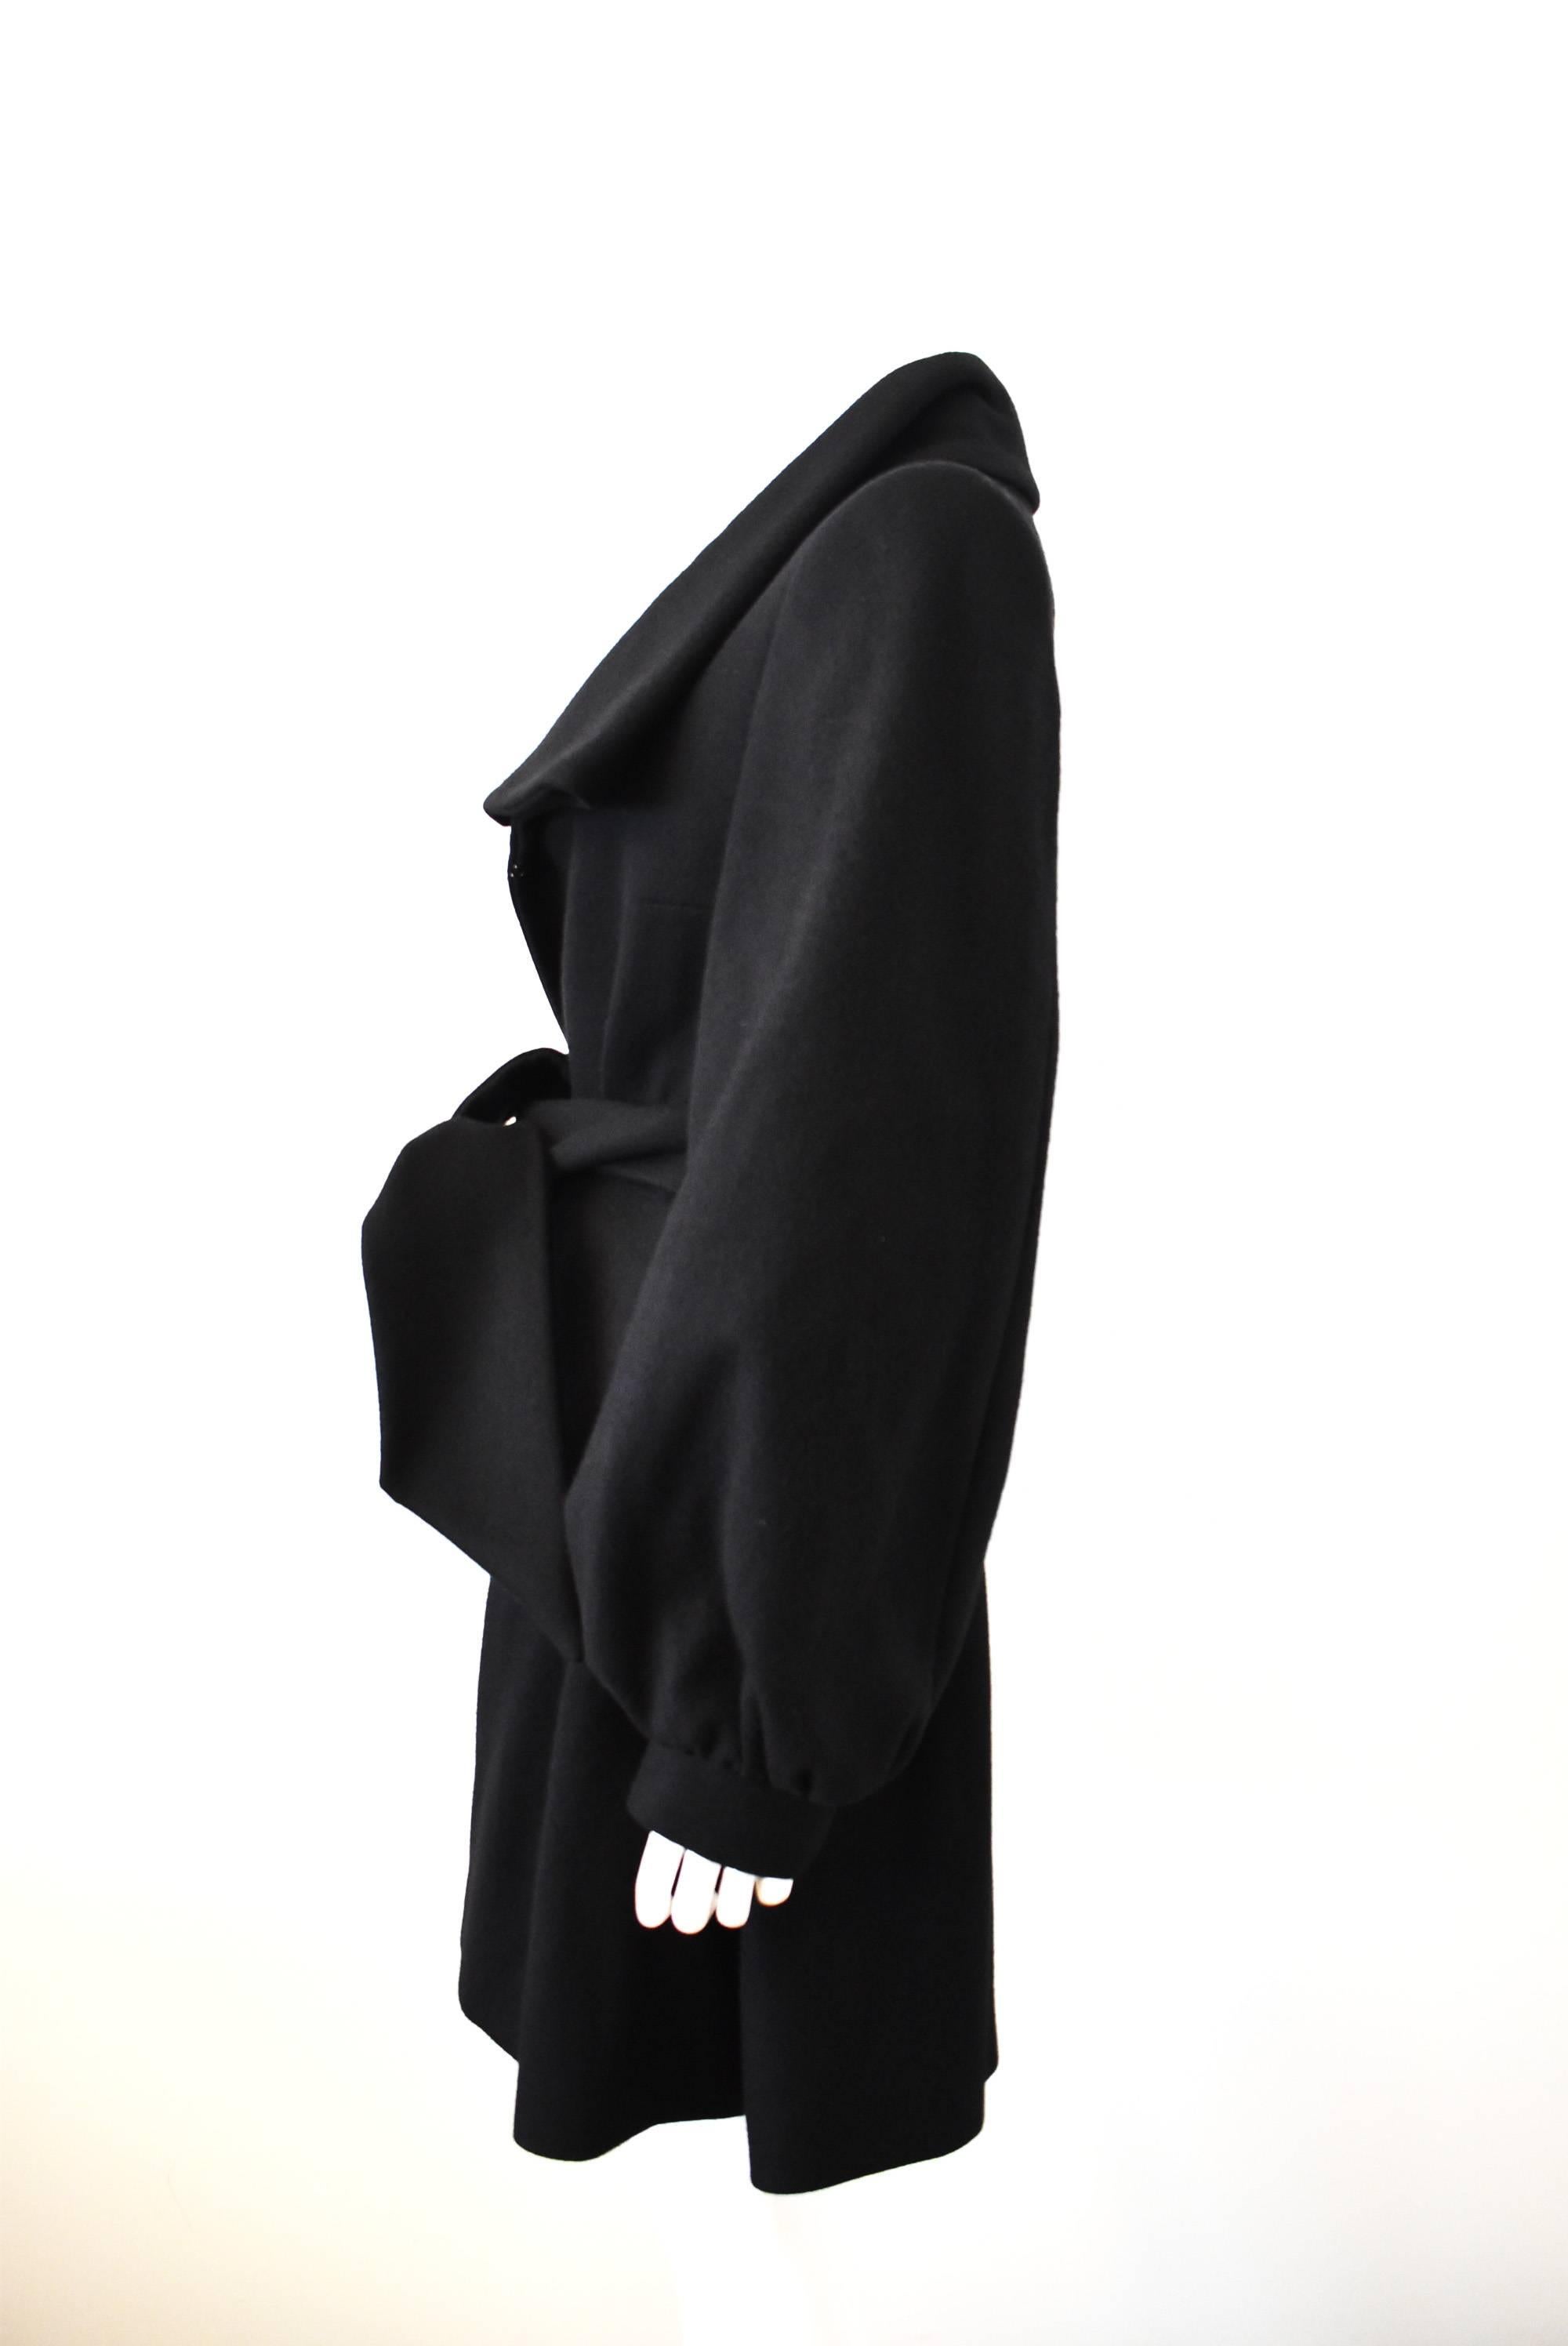 A luxurious and super soft cashmere and wool black coat from Stella McCartney. The coat has a large collar, open from and belt-tie fastening at the waist. This creates an hourglass silhouette on the wearer, drawing in the waist. It also has